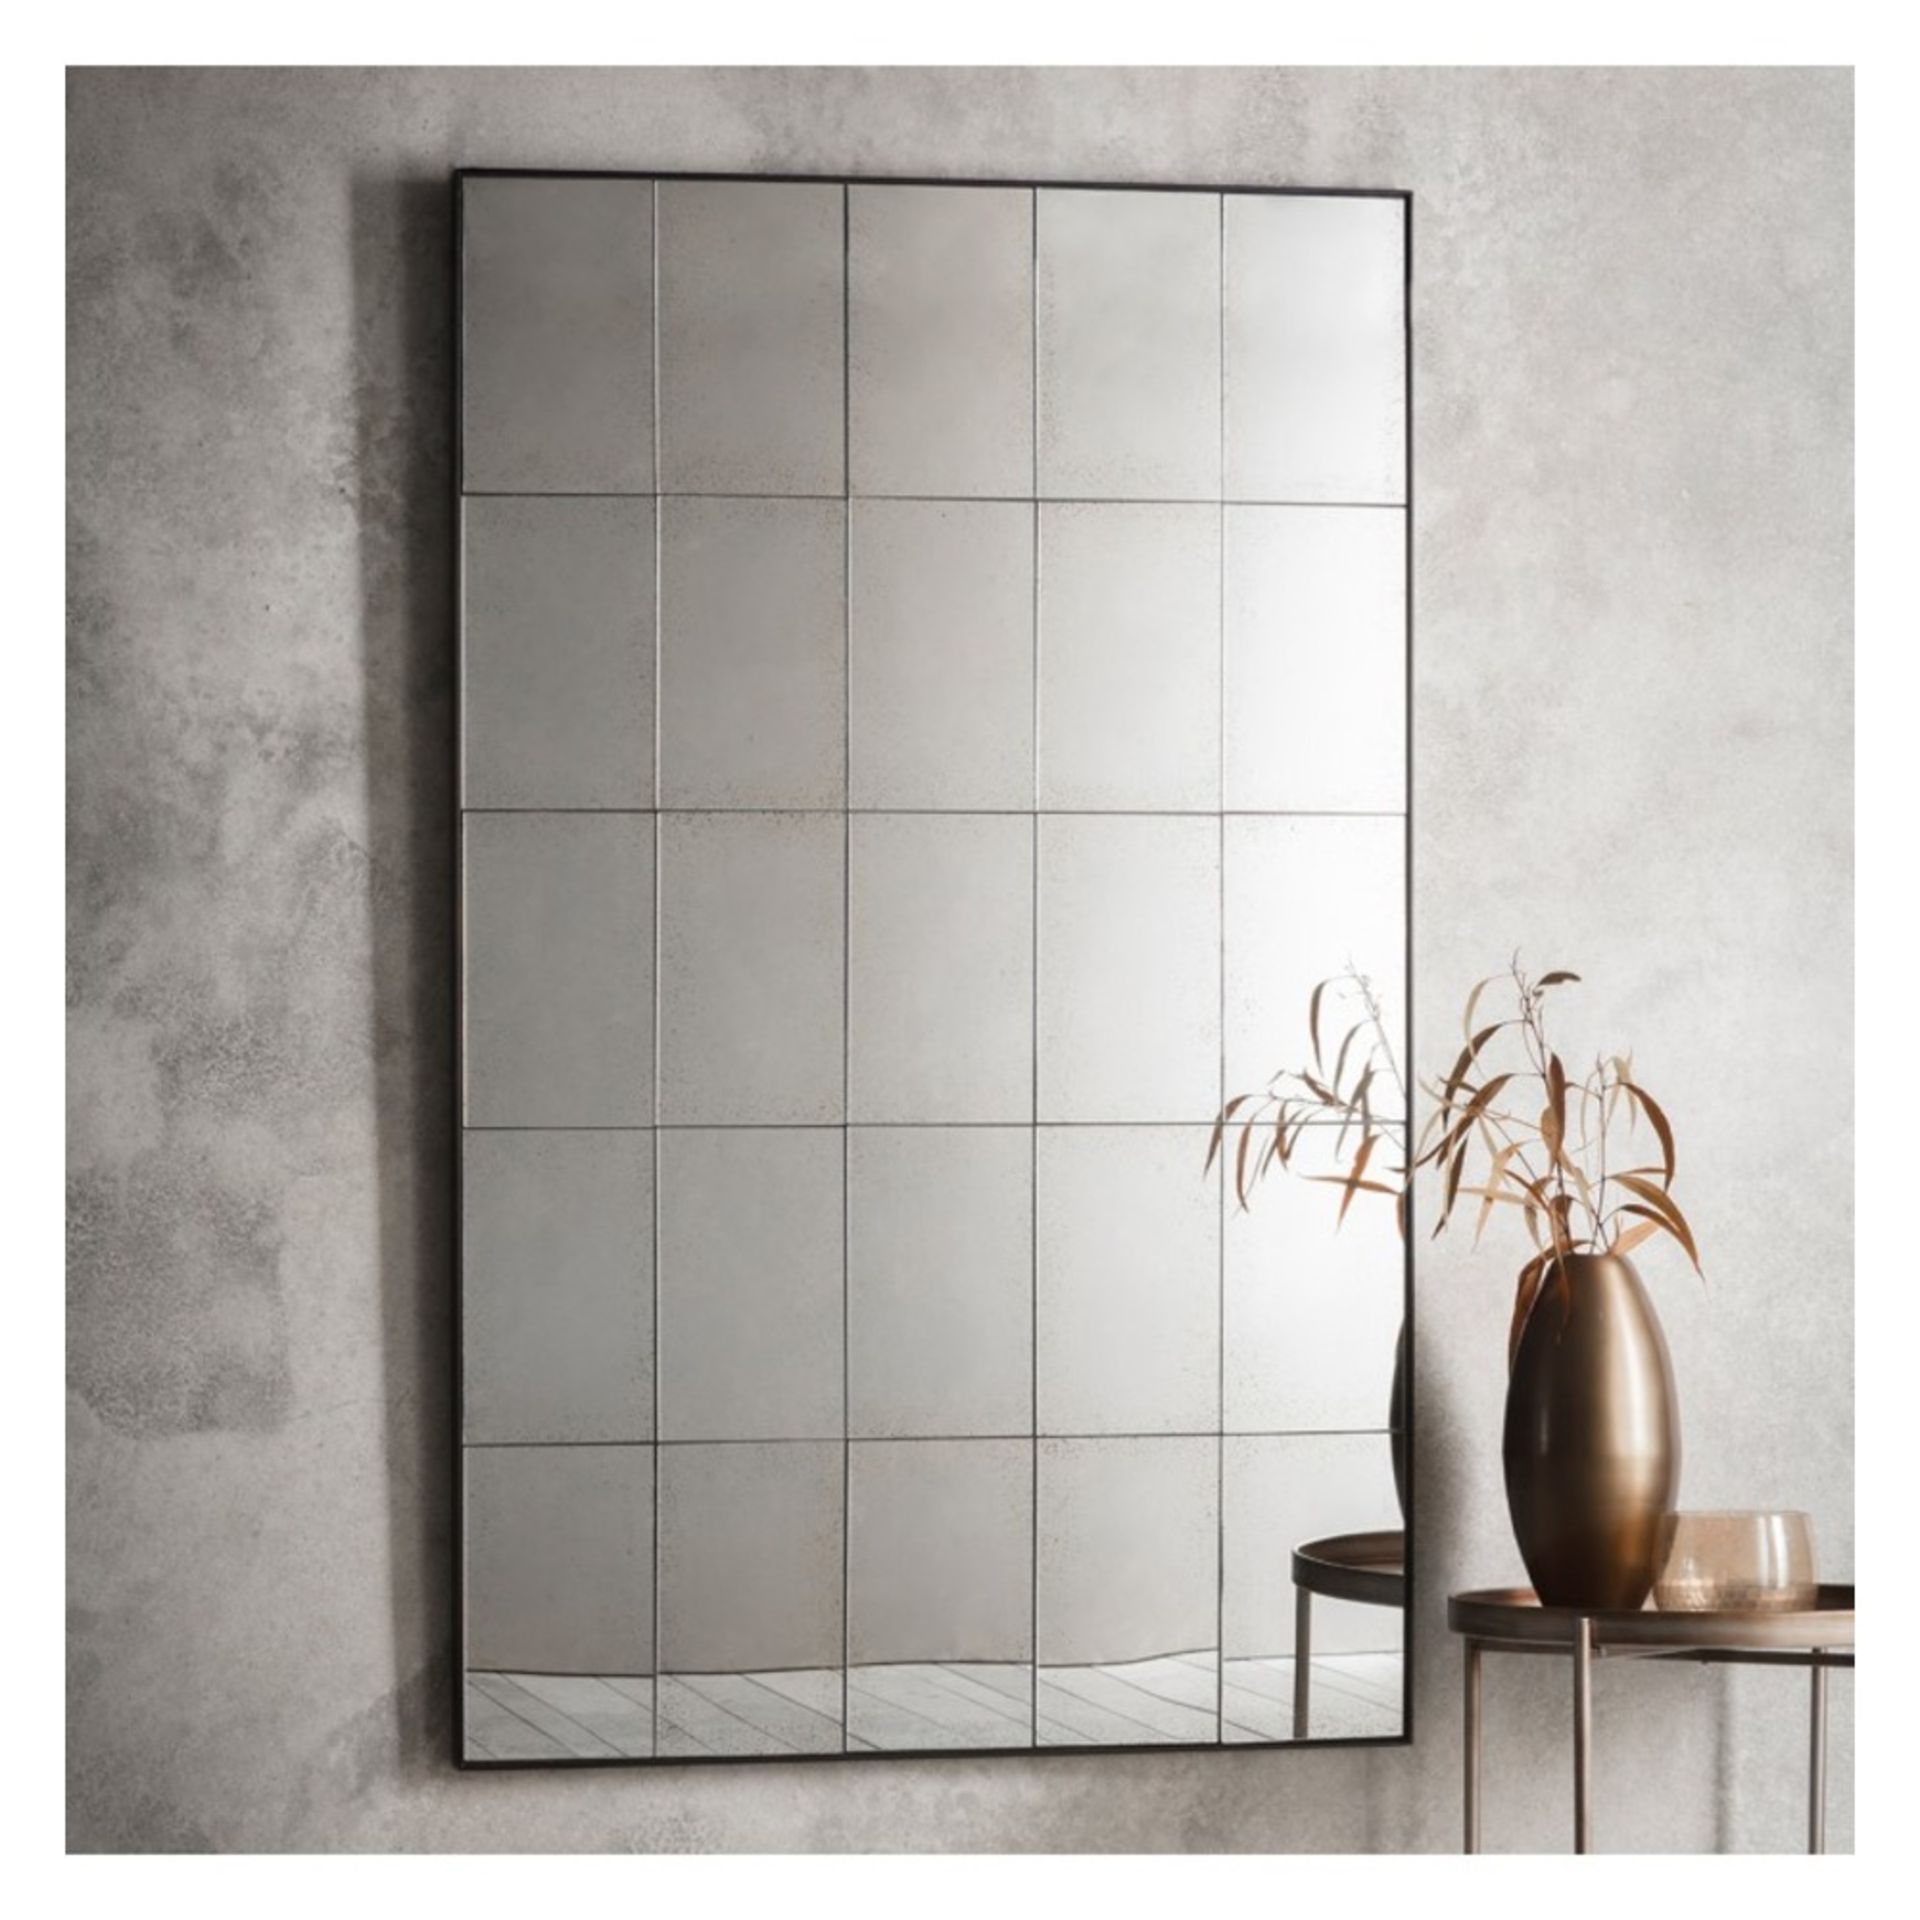 Boxley Mirror 620 x 1600mm Contemporary Statement Mirror Featuring Individual Mirrored Pieces With